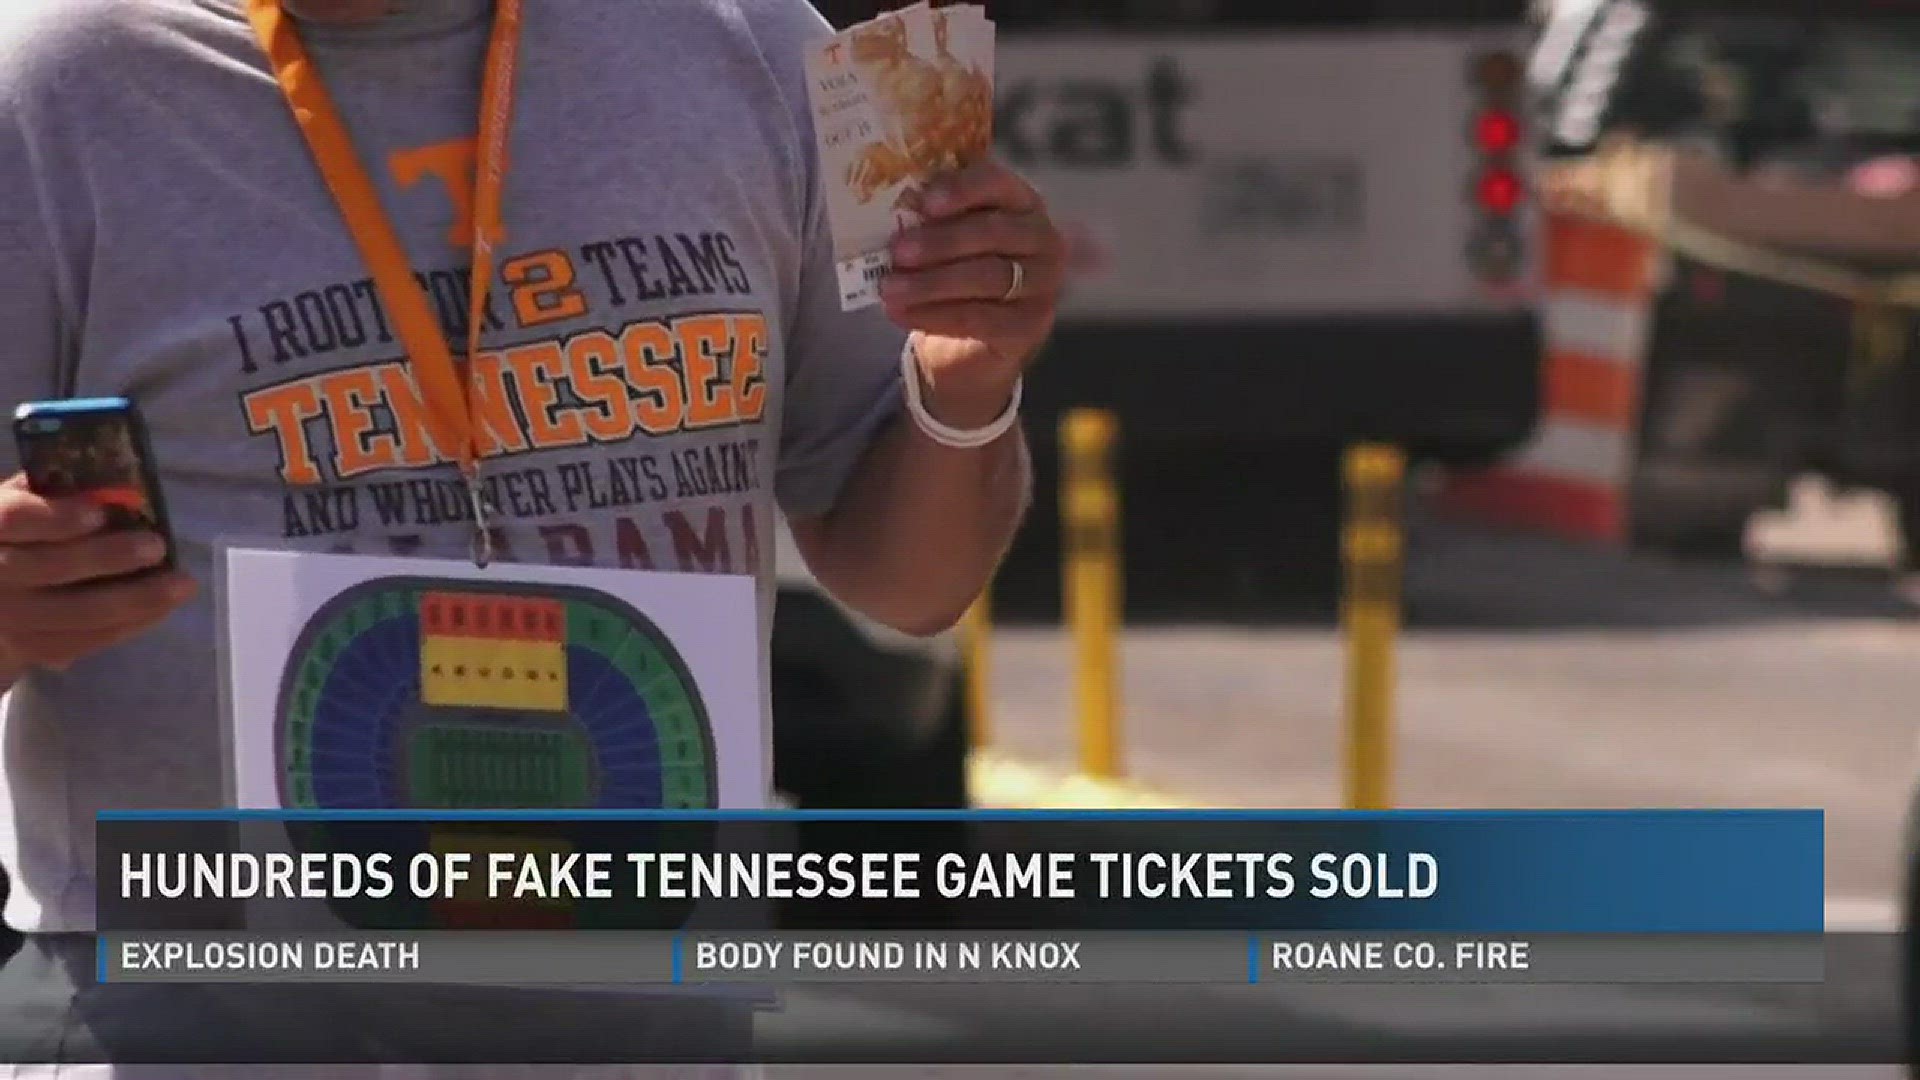 Oct. 17, 2016: UT's ticket office says more than 300 fans bought fake tickets for the UT-Alabama game.